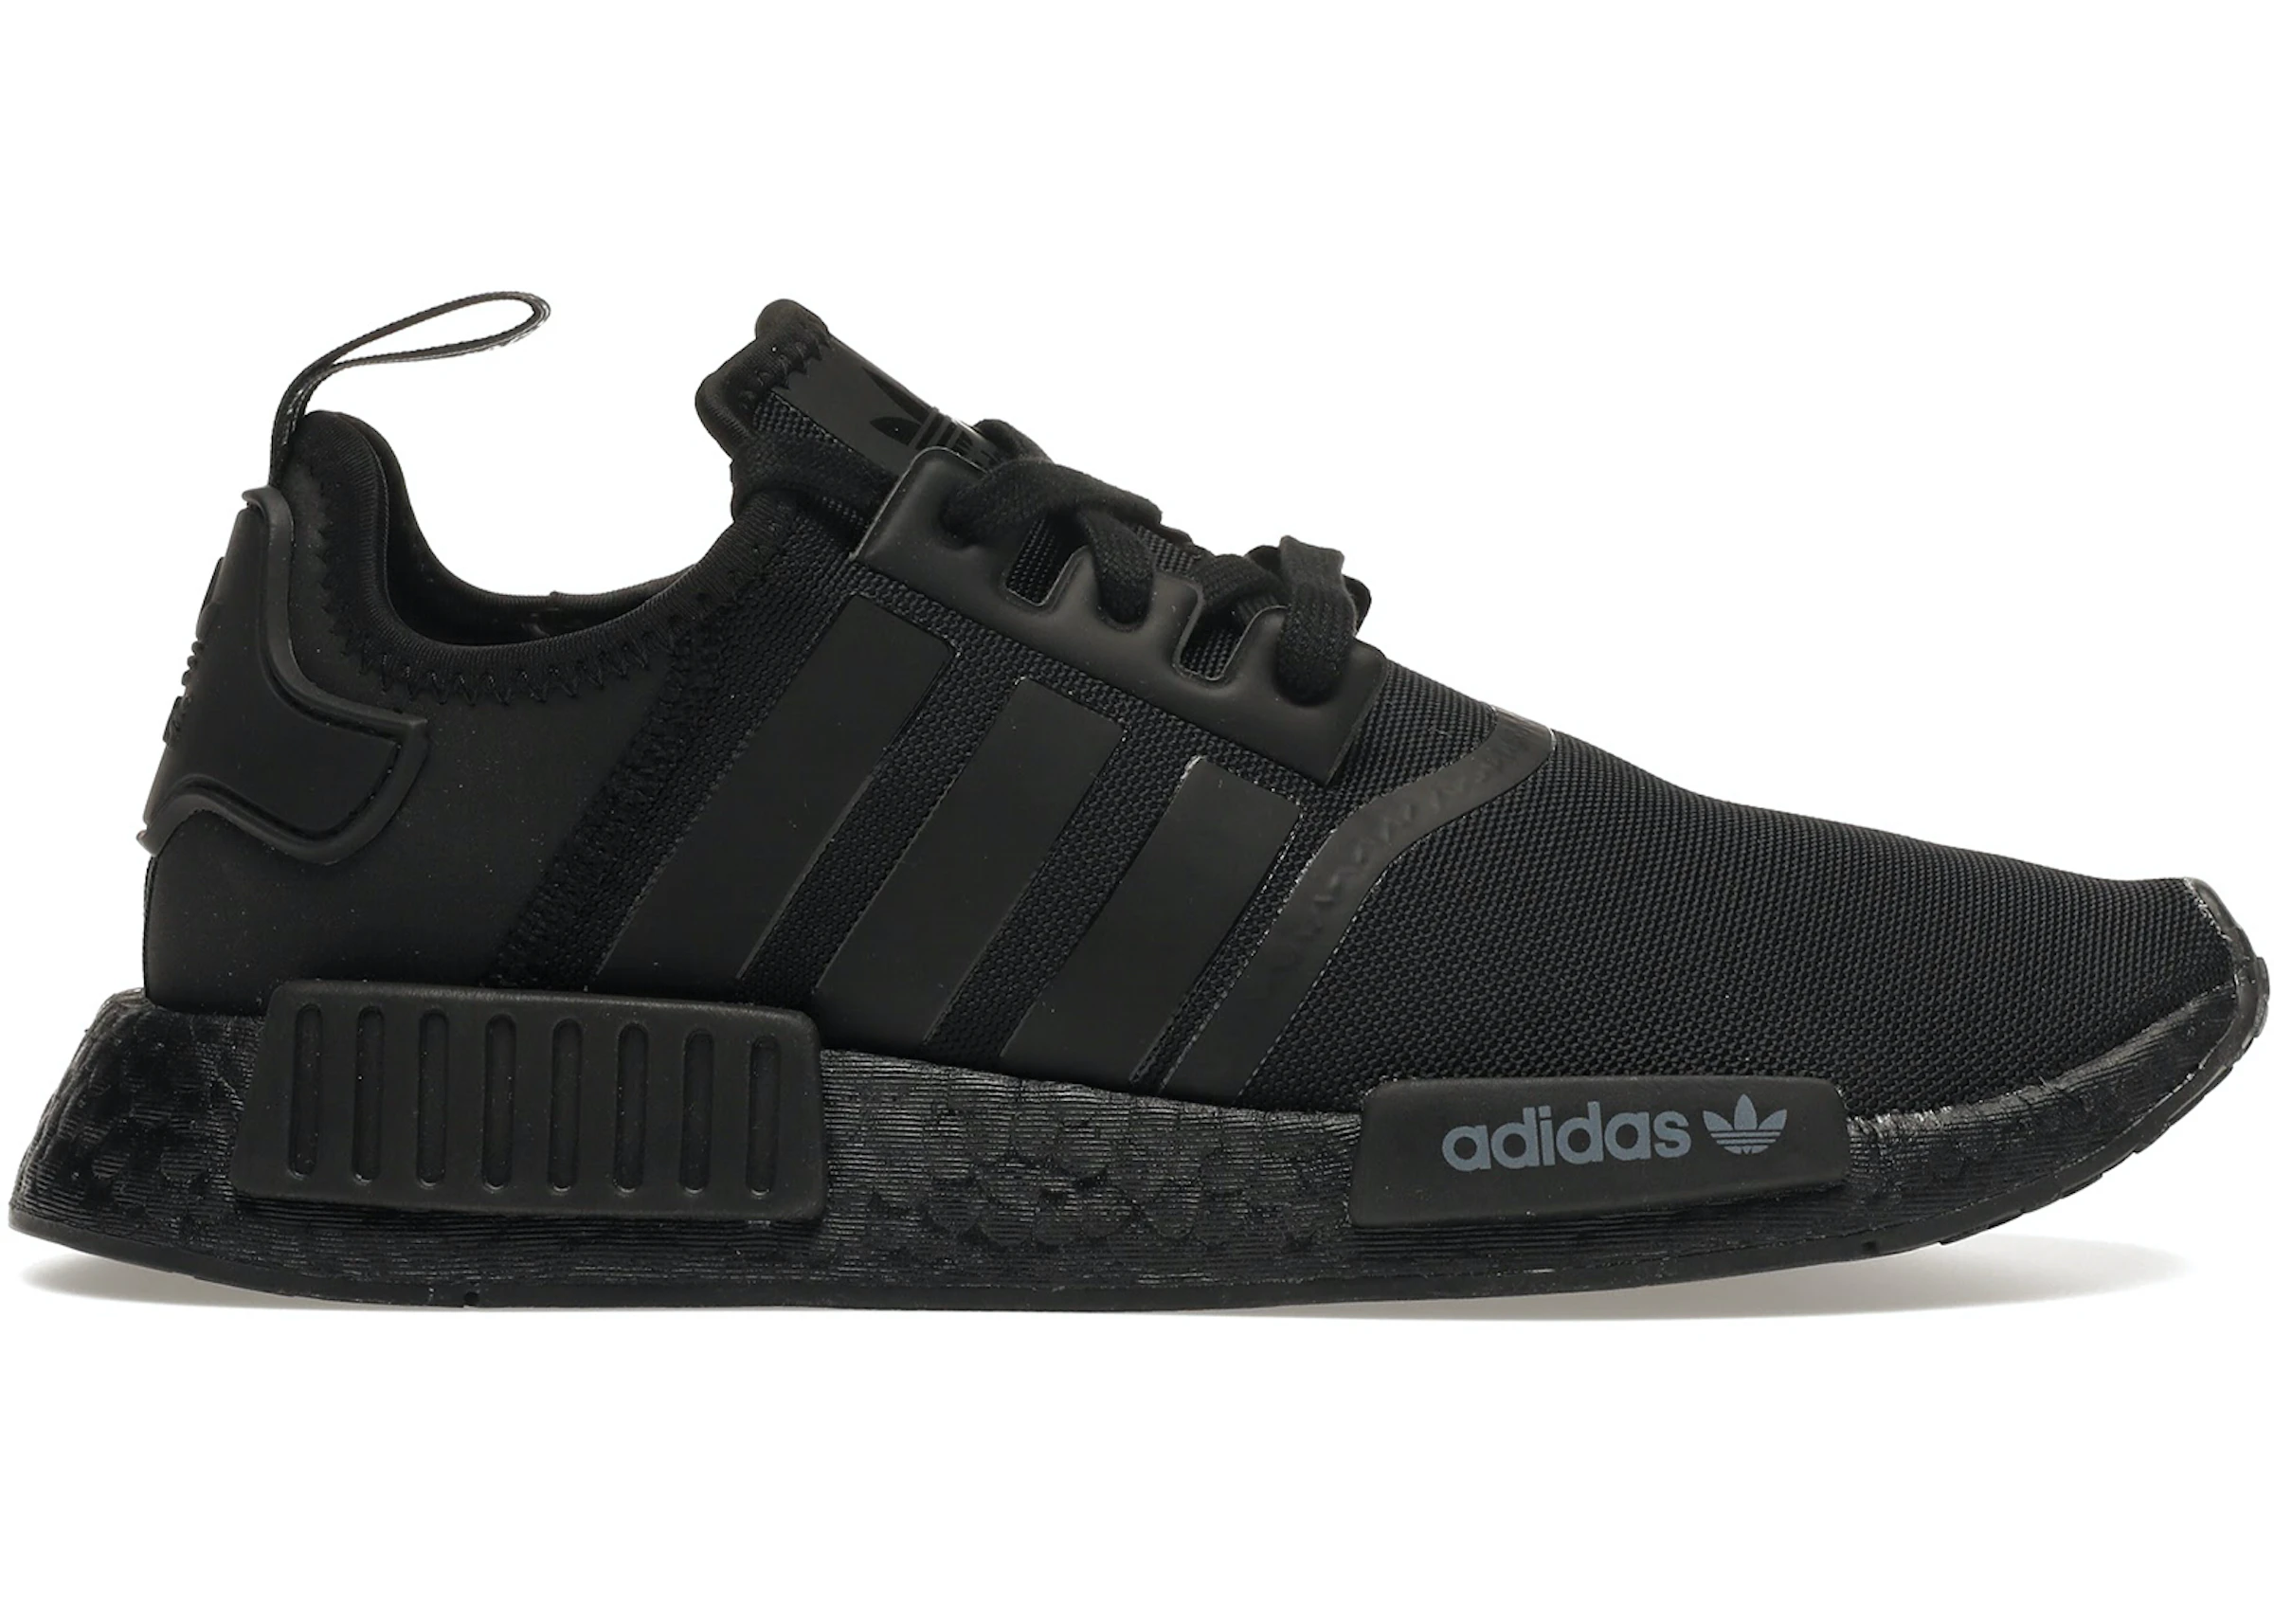 Admin inference Thicken adidas NMD - All Sizes & Colorways at StockX